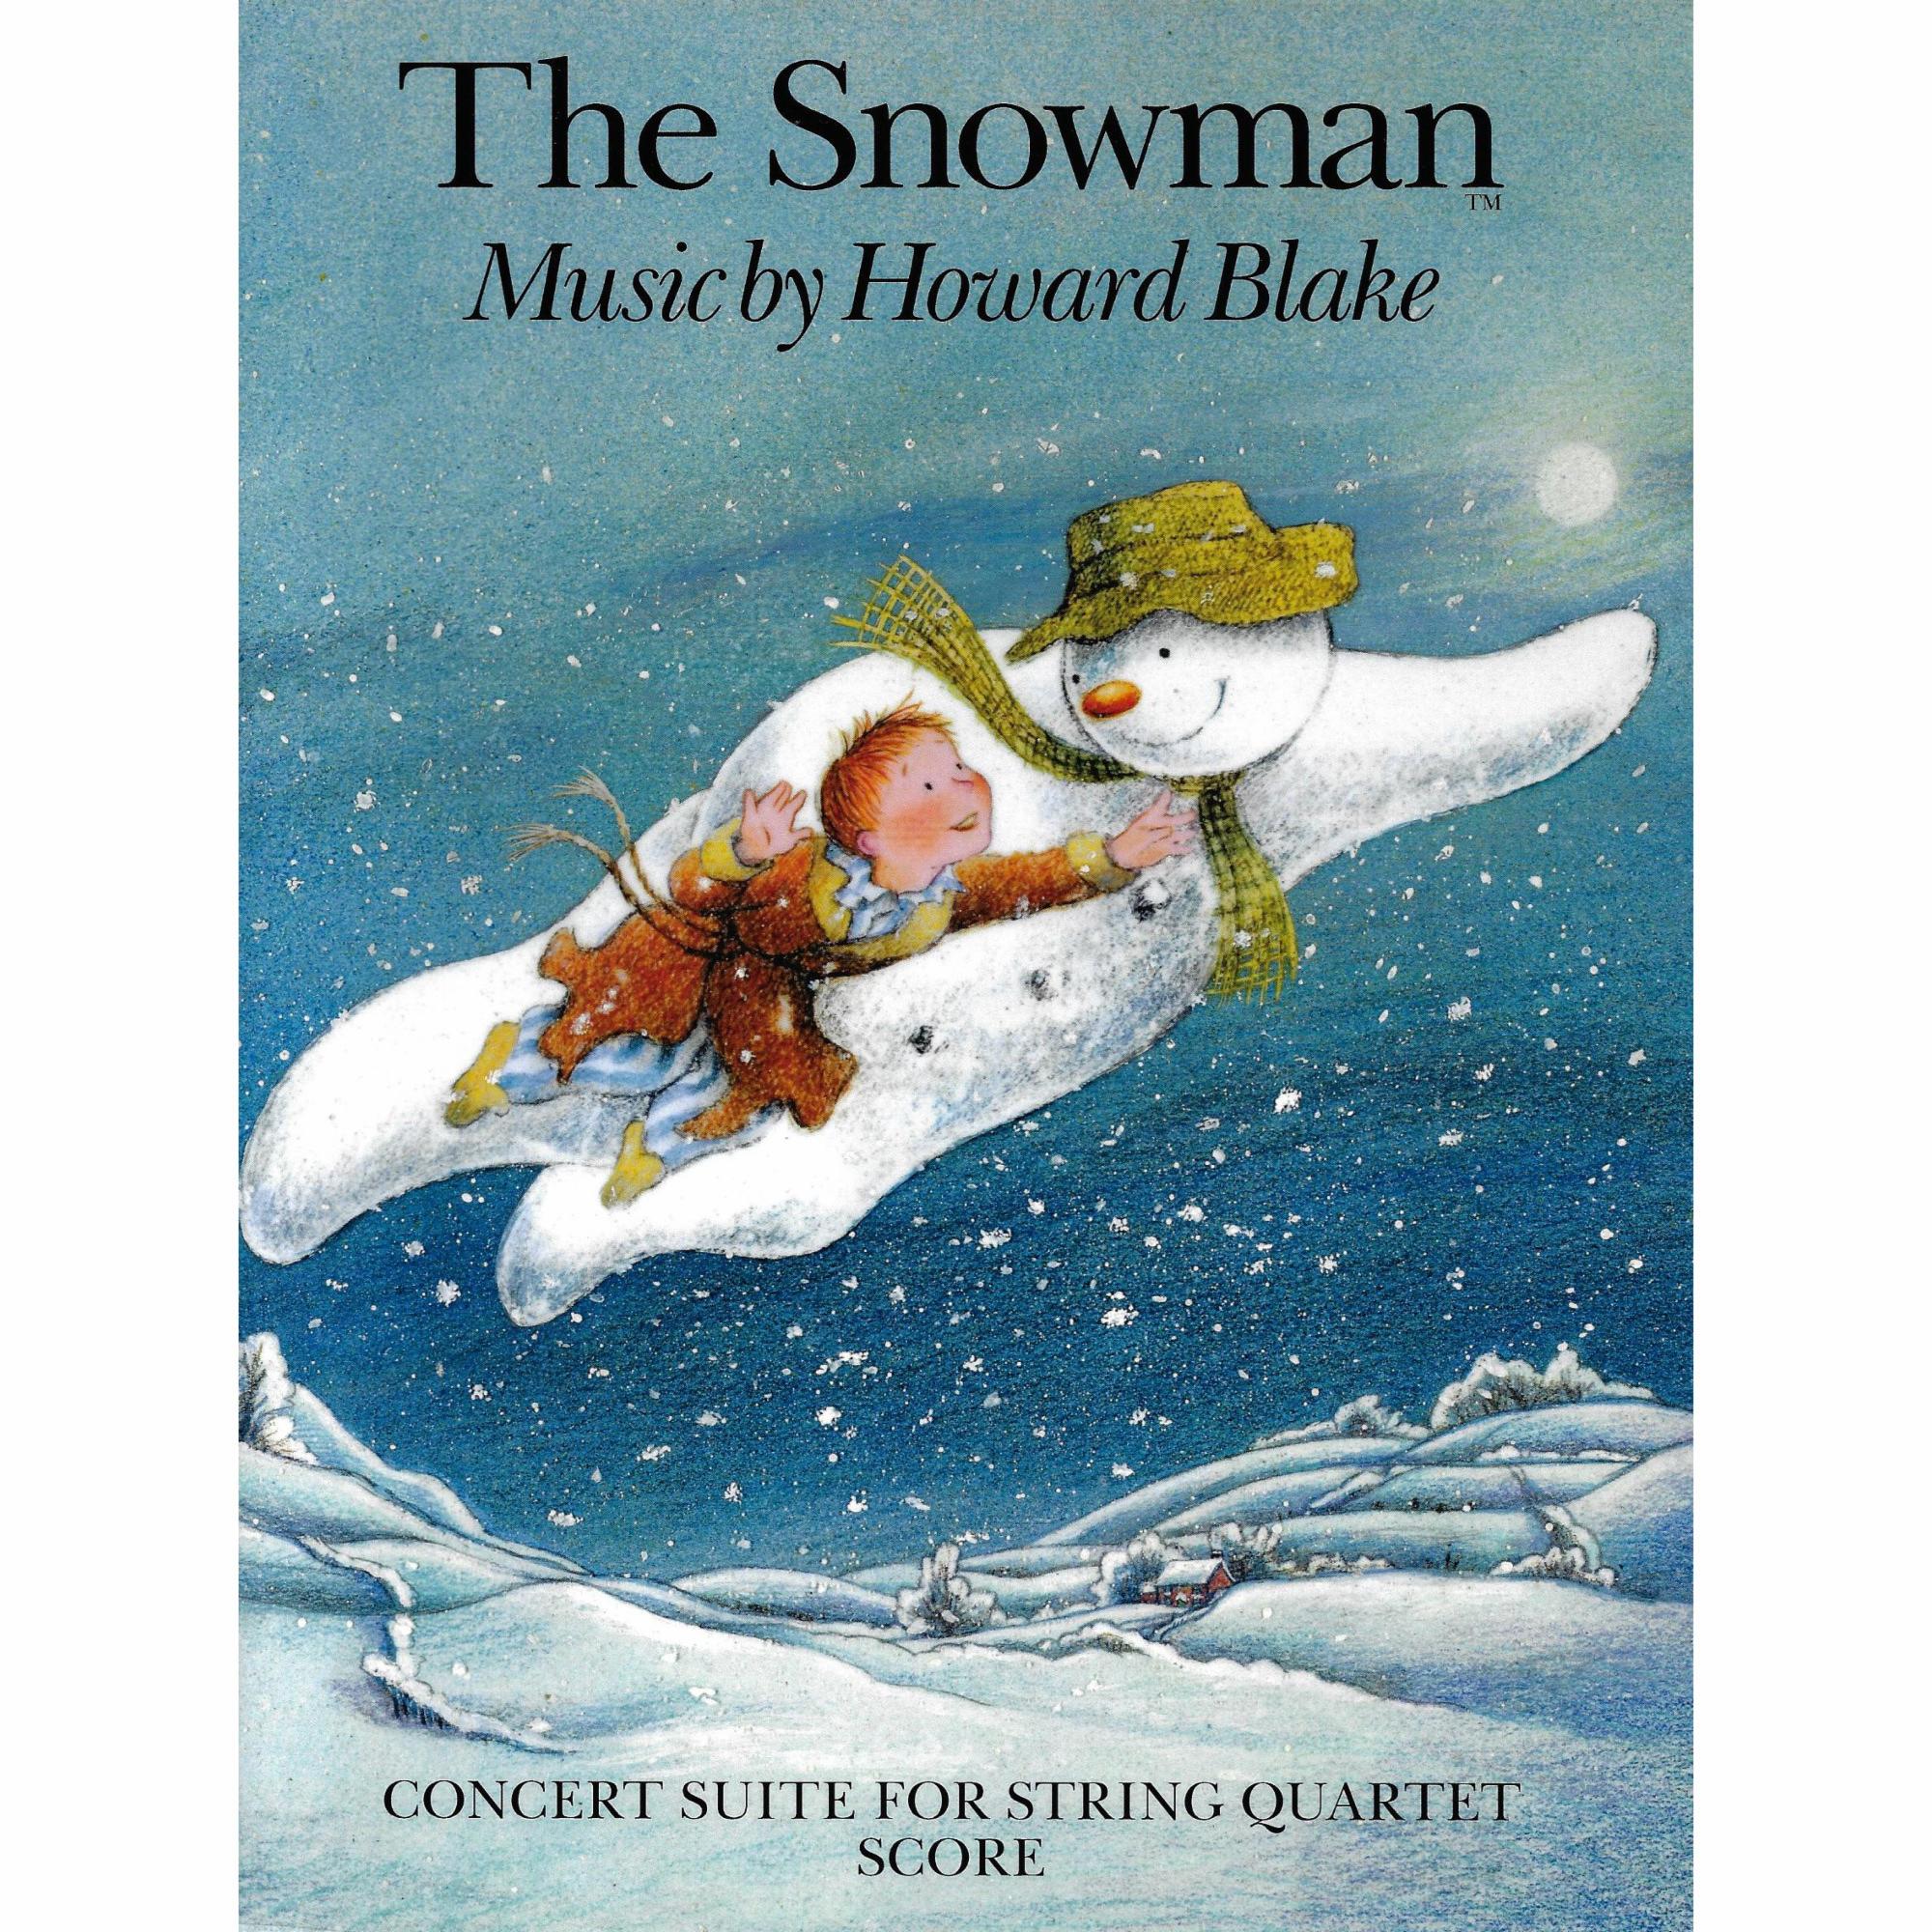 Concert Suite from The Snowman for String Quartet